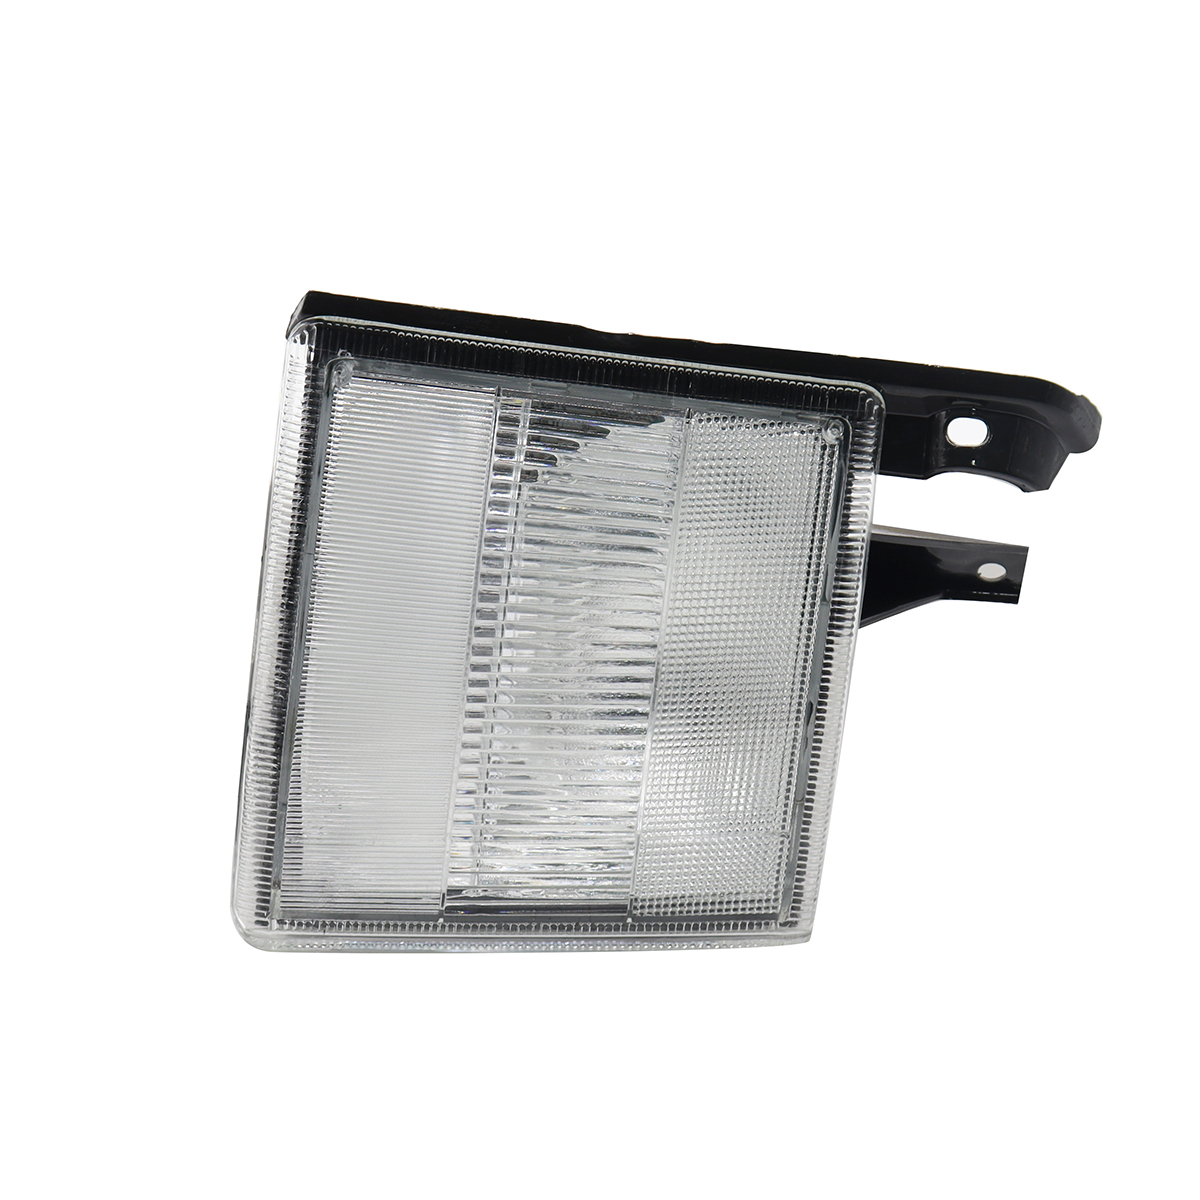 Geling Universally Applicable Wholesale Price White with OEM Car Corner Lamp for Mitsubishi Canter 1993 - 2002 FM657 Fk617